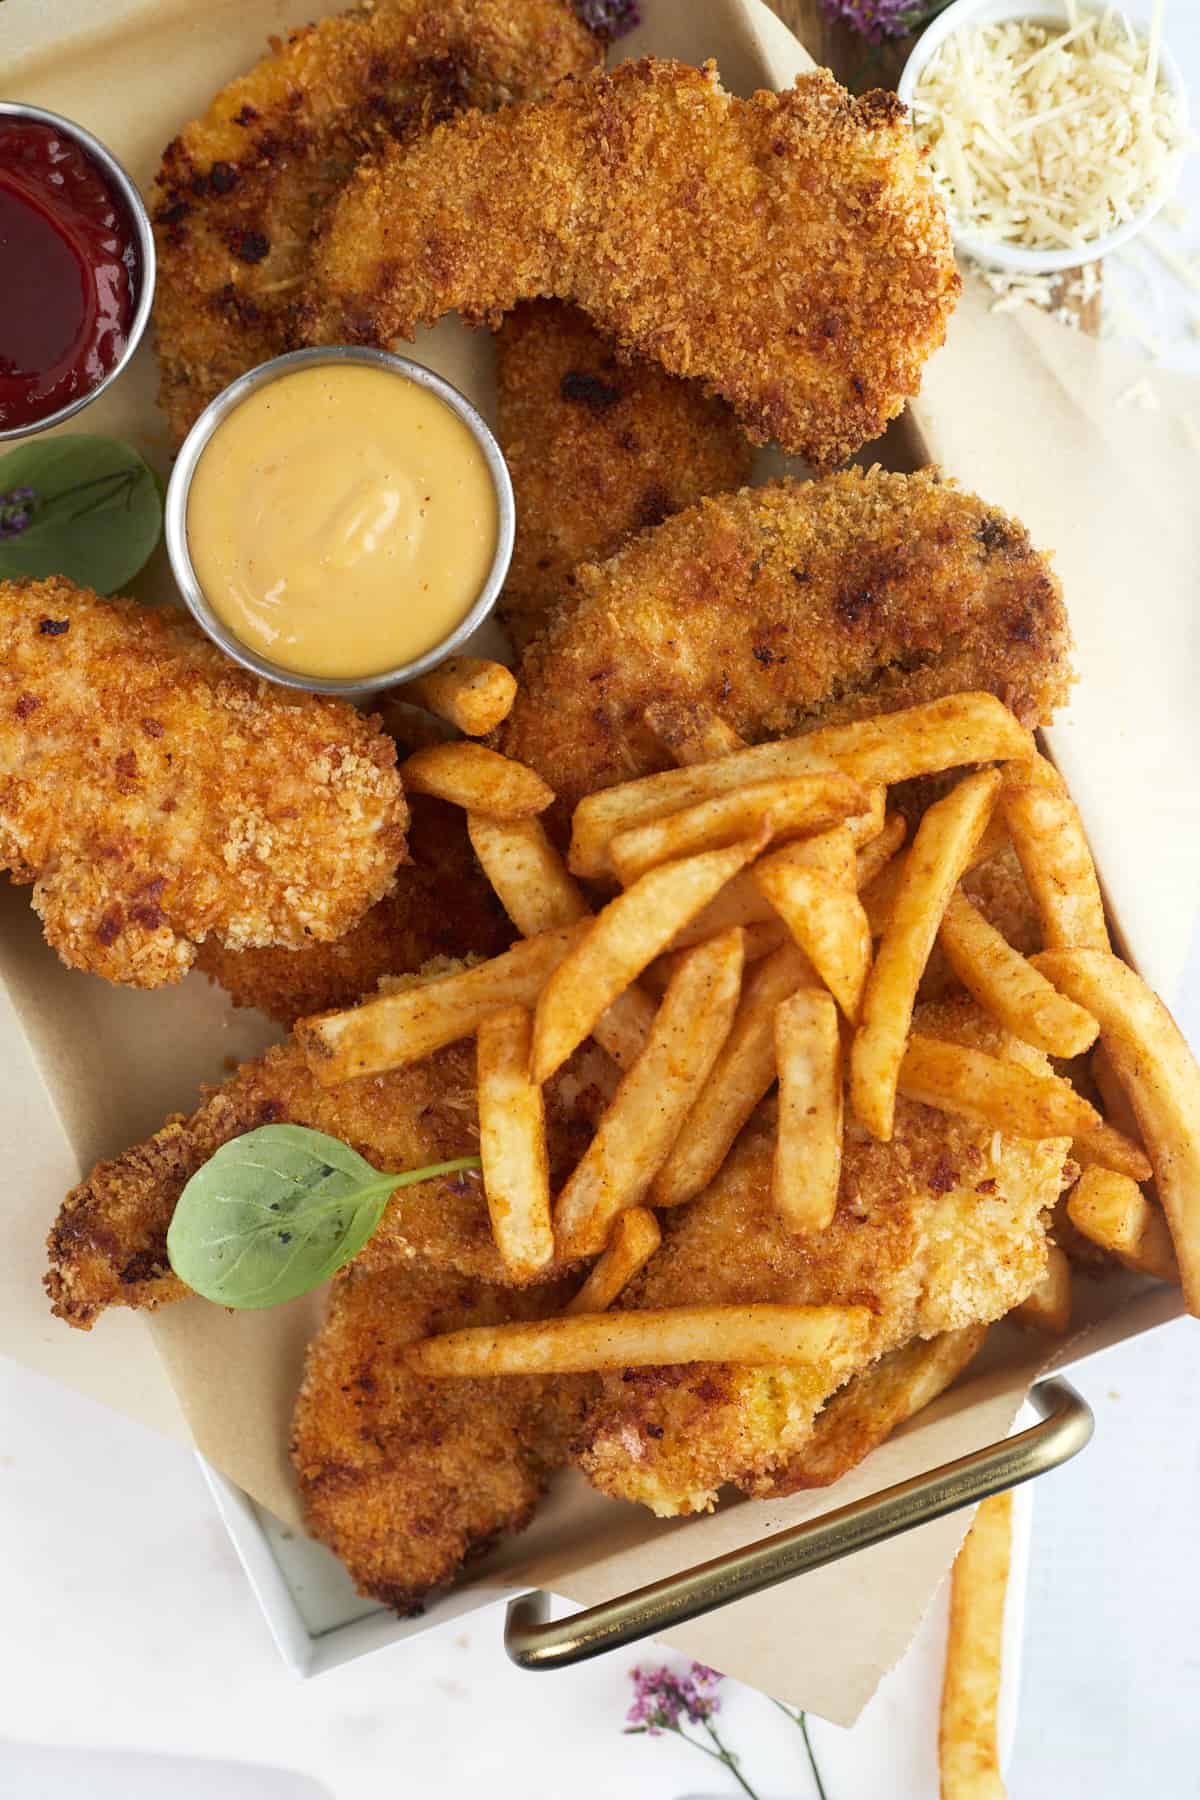 parmesan chicken tenders on a baking sheet with fries and honey mustard sauce